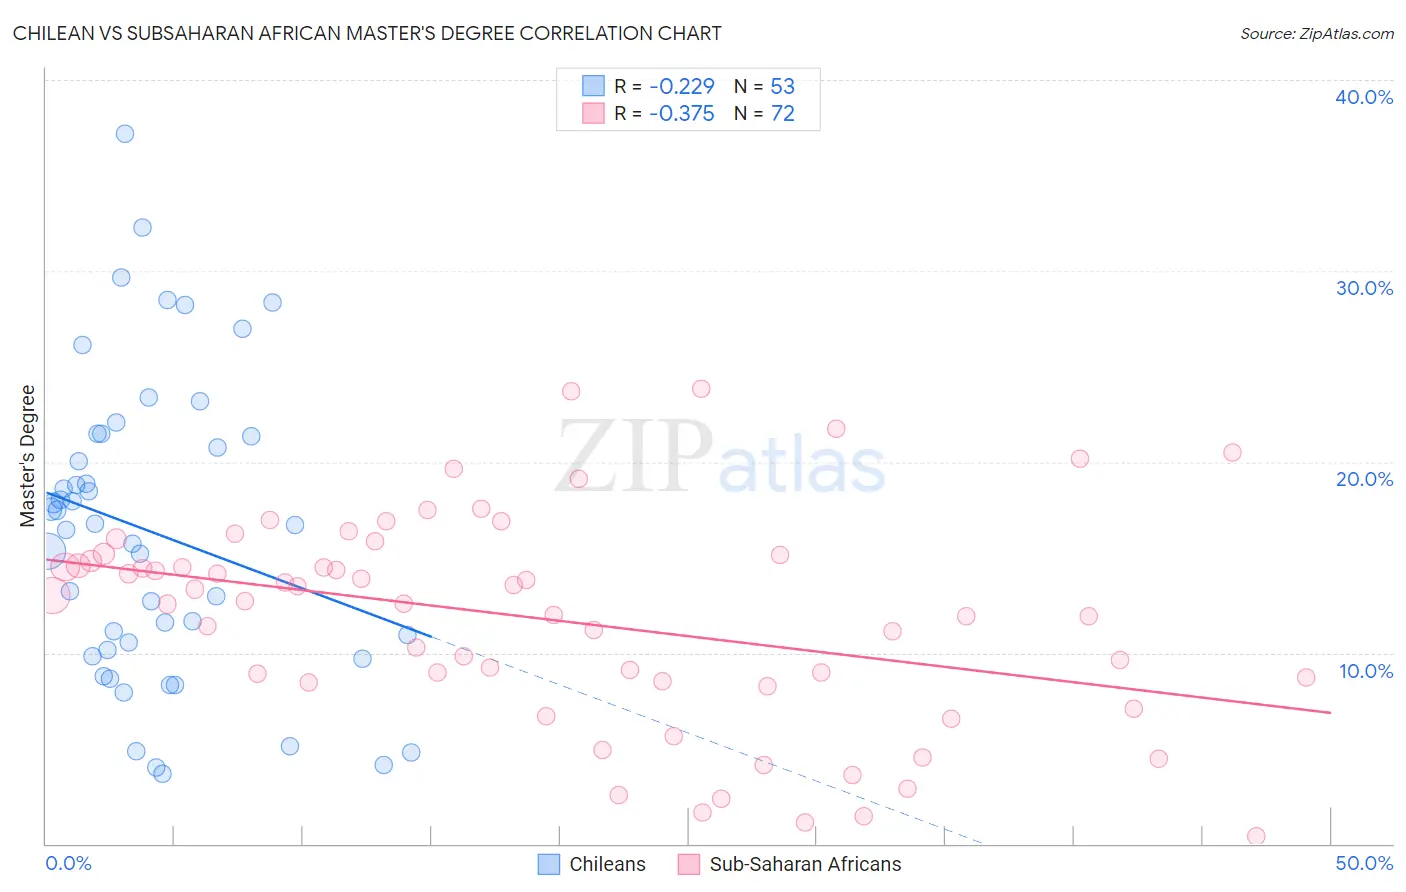 Chilean vs Subsaharan African Master's Degree